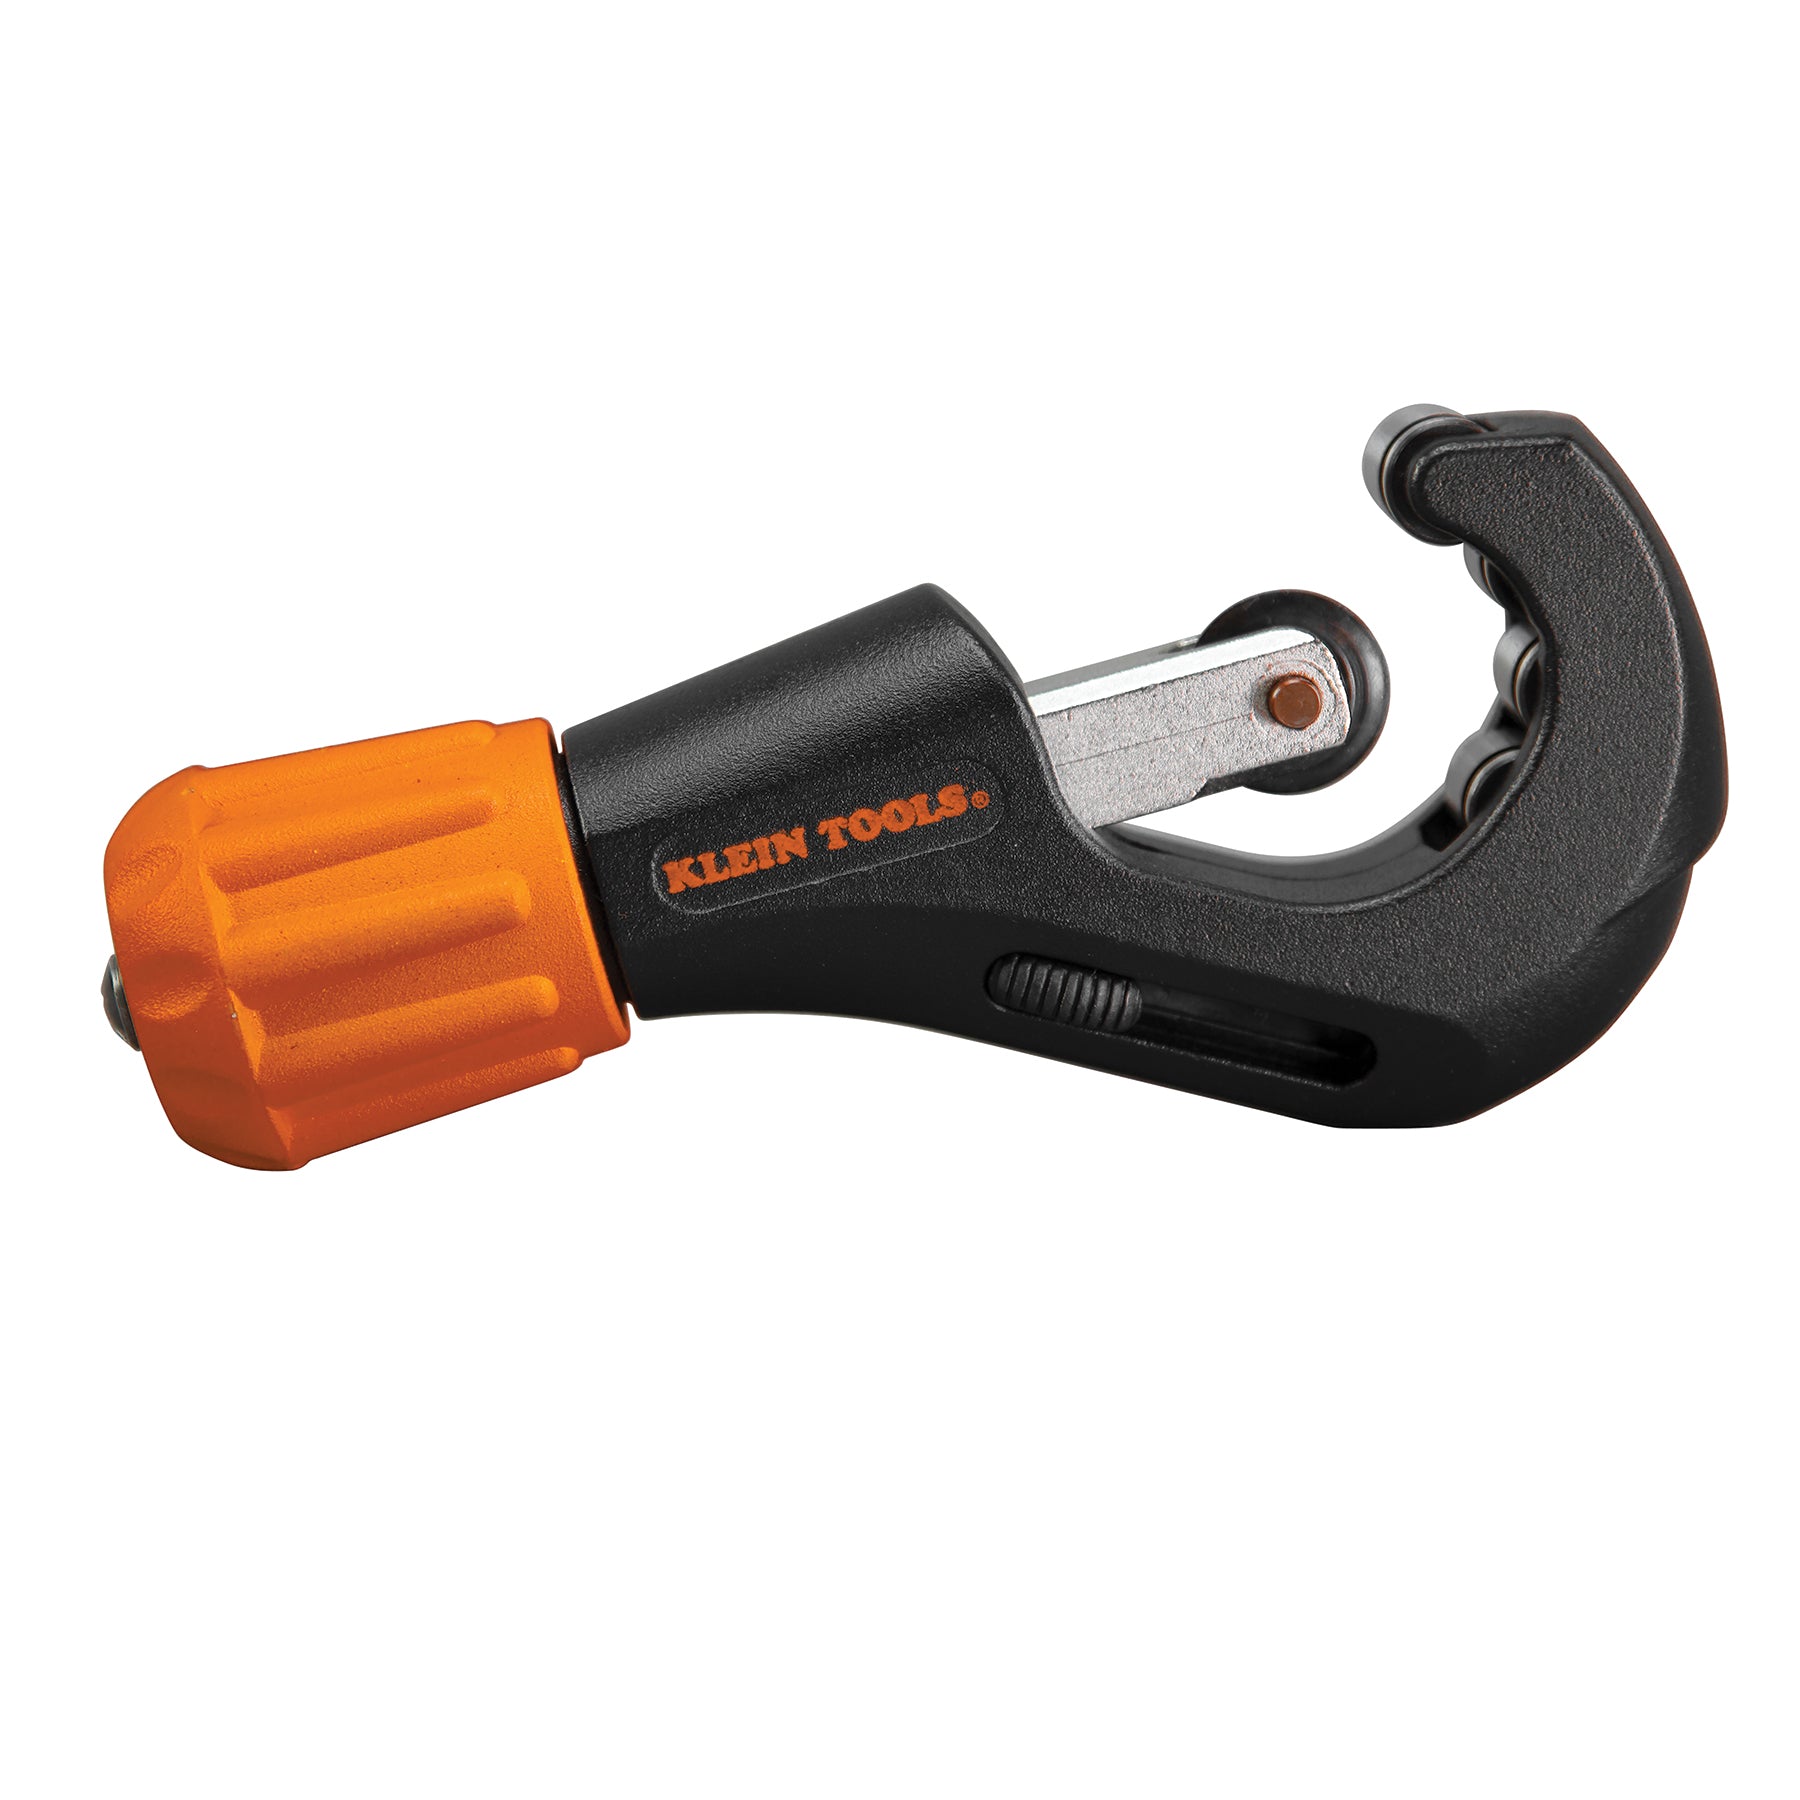 88904 Klein Tools Tube cutter